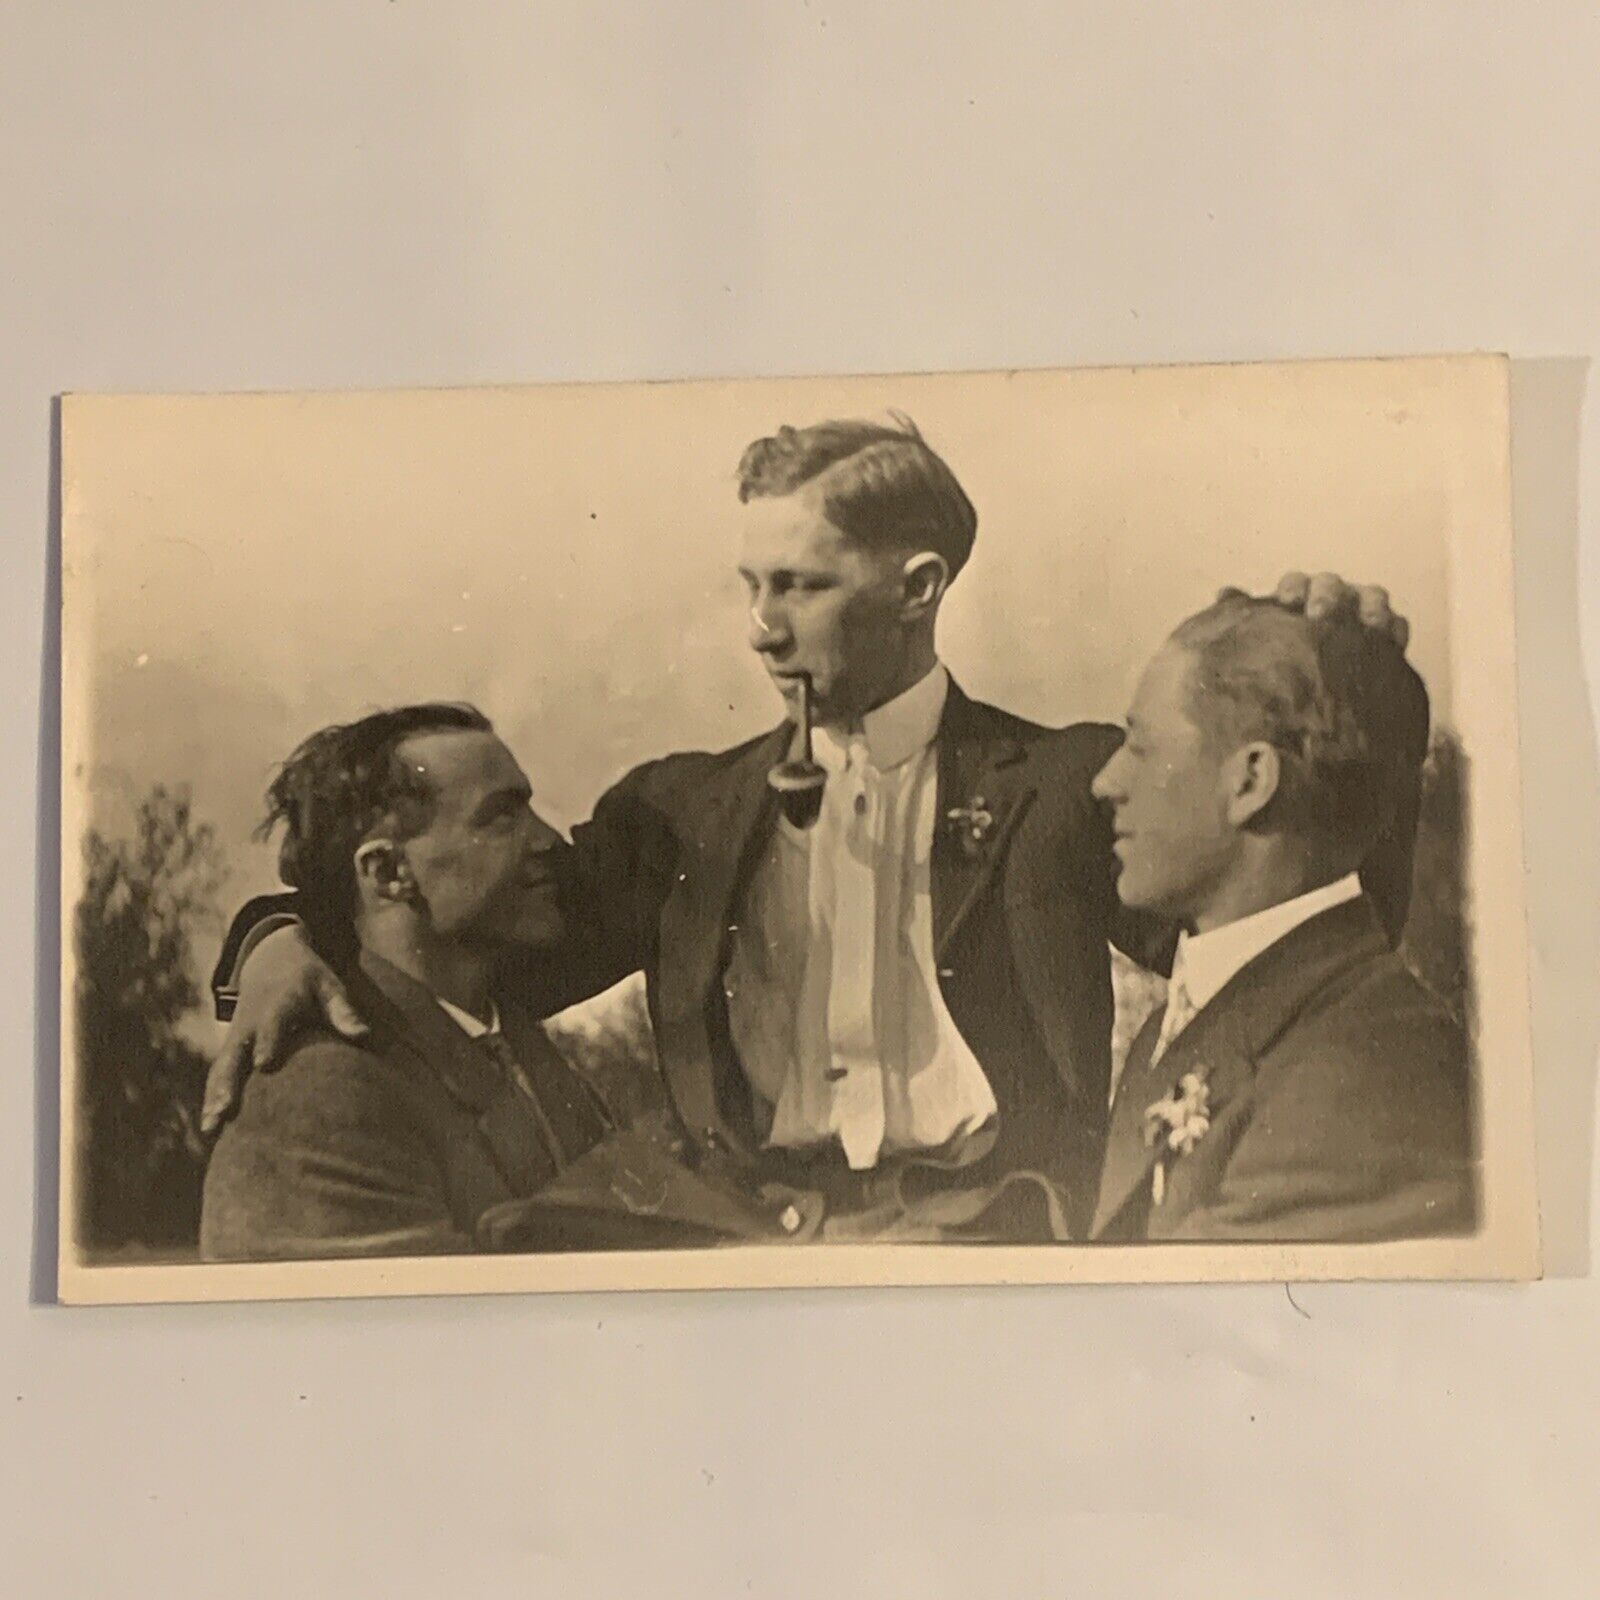 c. 1915 RPPC Handsome Young Men Affectionate Playful Gay Interest Postcard